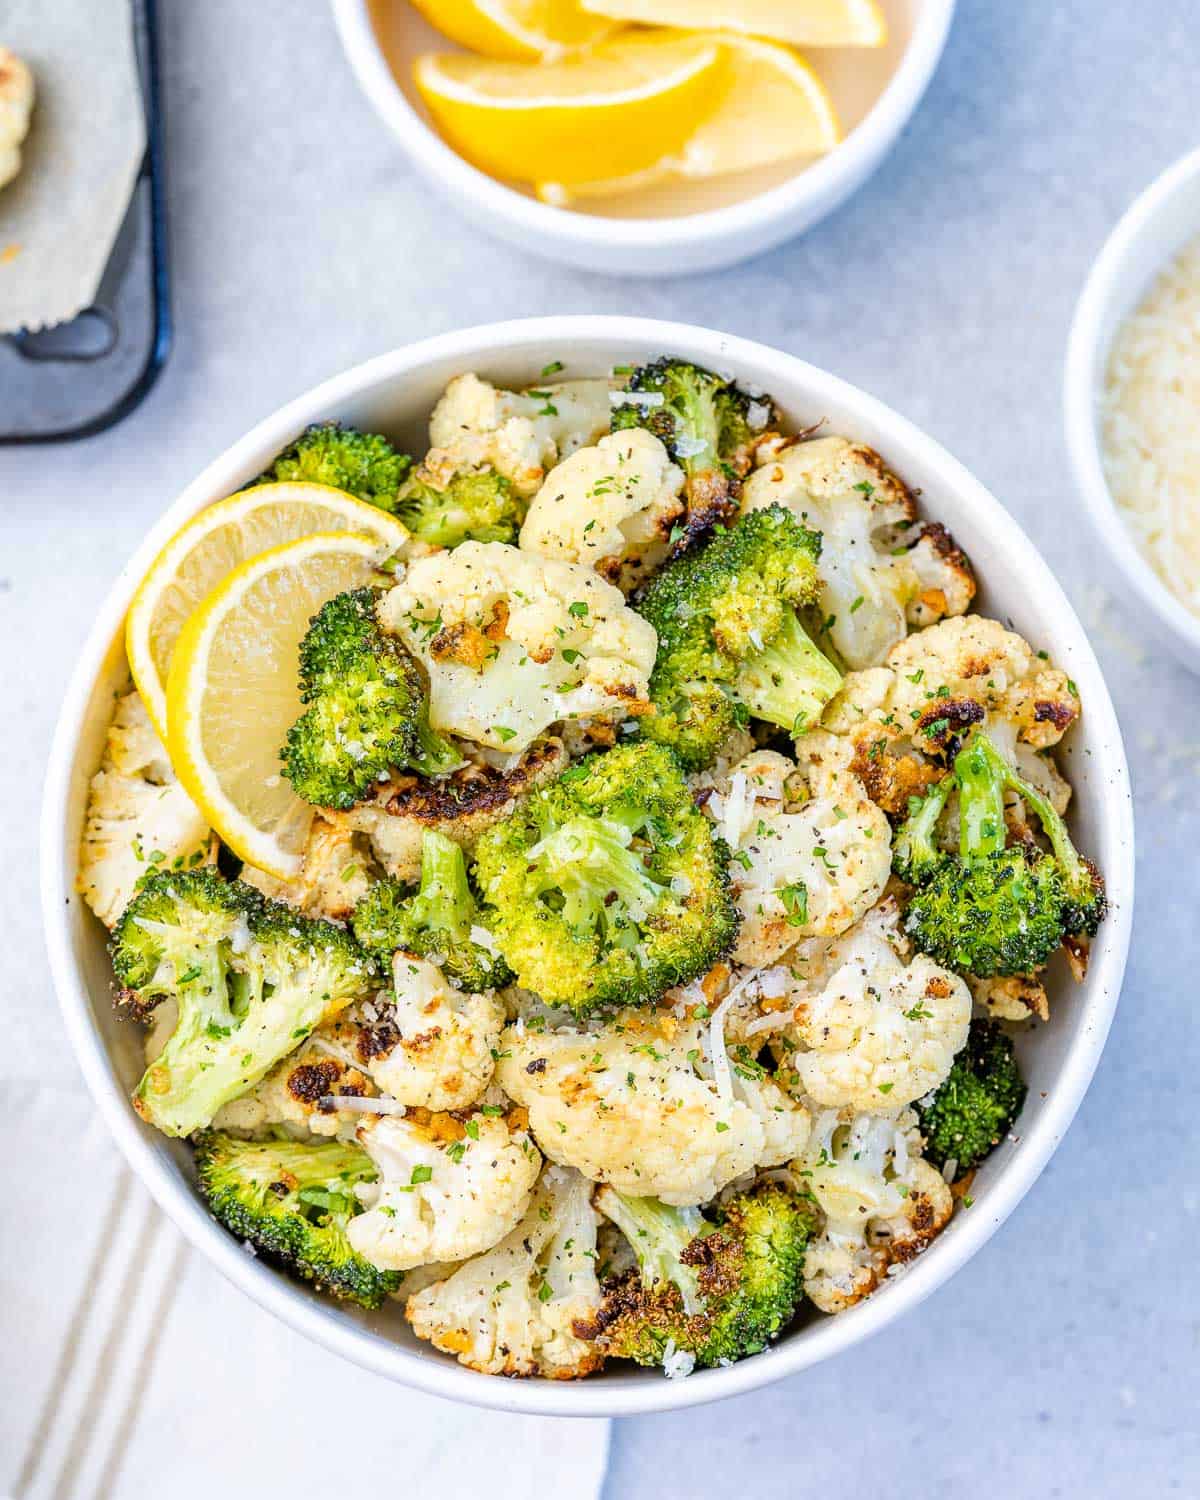 top view of cauliflower and broccoli in bowl with lemon and parsley